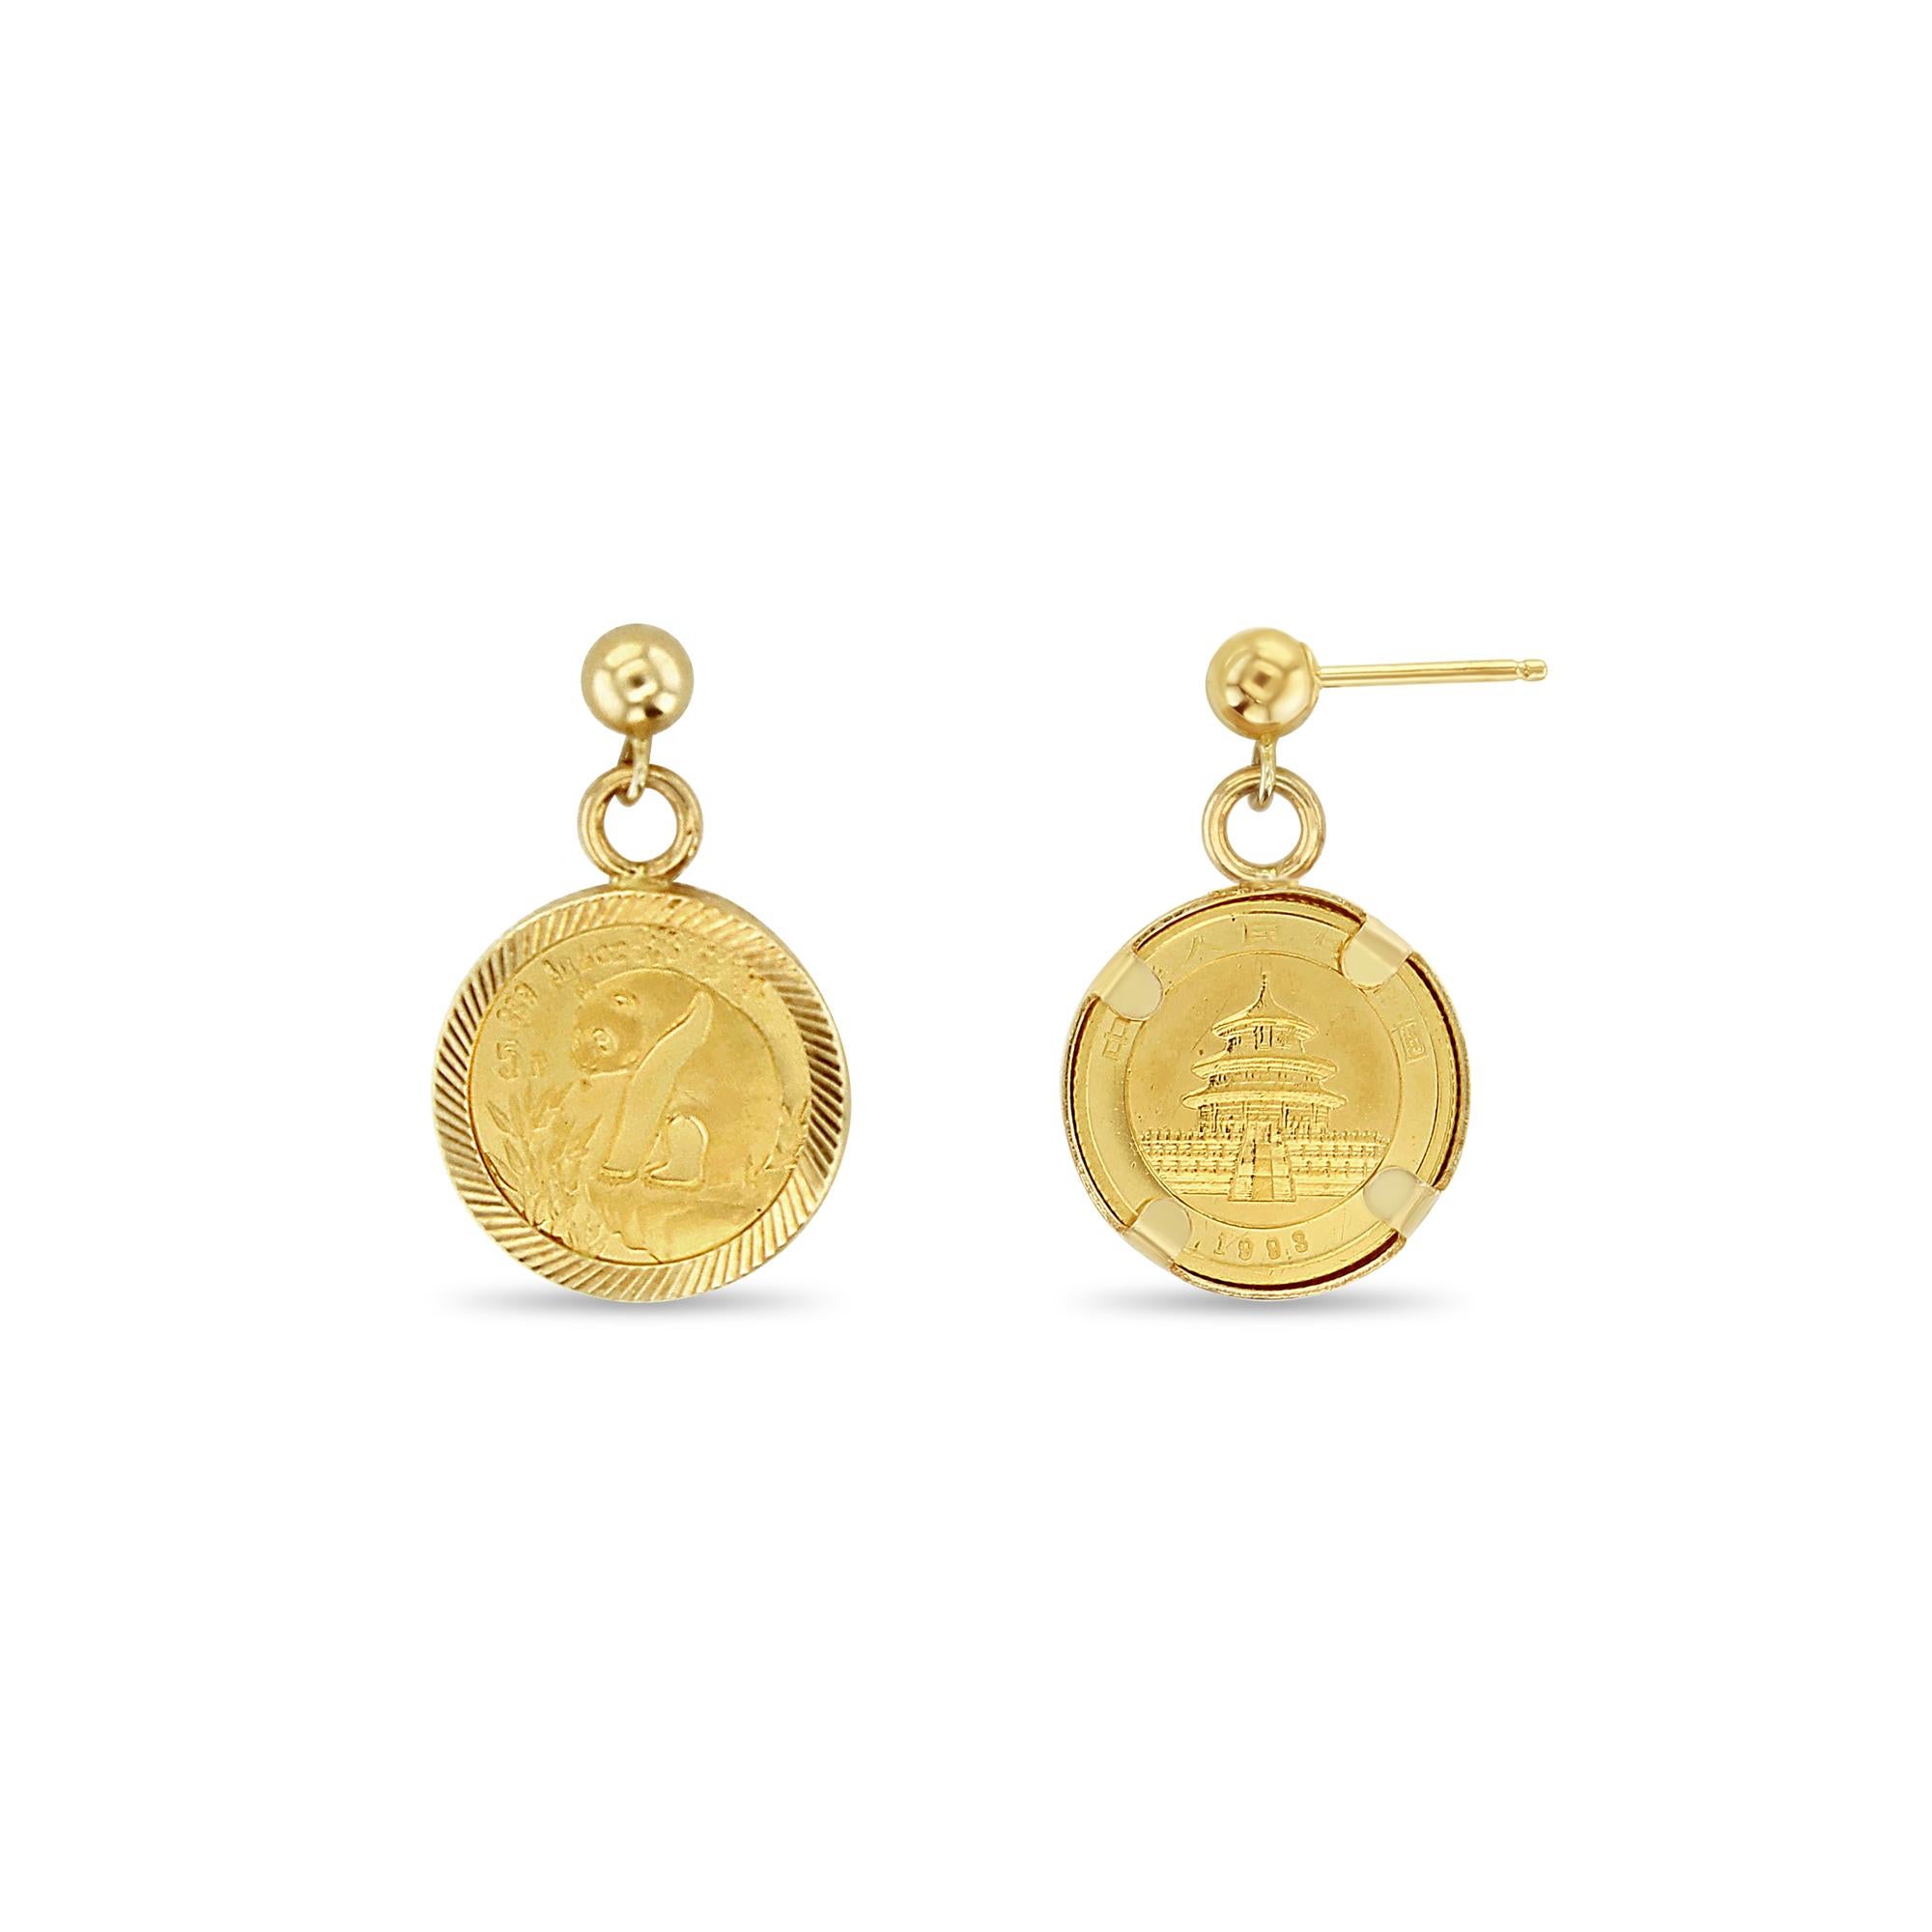 ♥ Coin Information ♥

Country: China
Gold Content: 1/20 OZ
Purity: .999 
Denomination: 5 Yuan
Year: 1998
Obverse: Temple of Heaven in Beijing encircled by the phrase “People’s Republic of China” in Chinese closed off by the year of issue.

♥ Earring